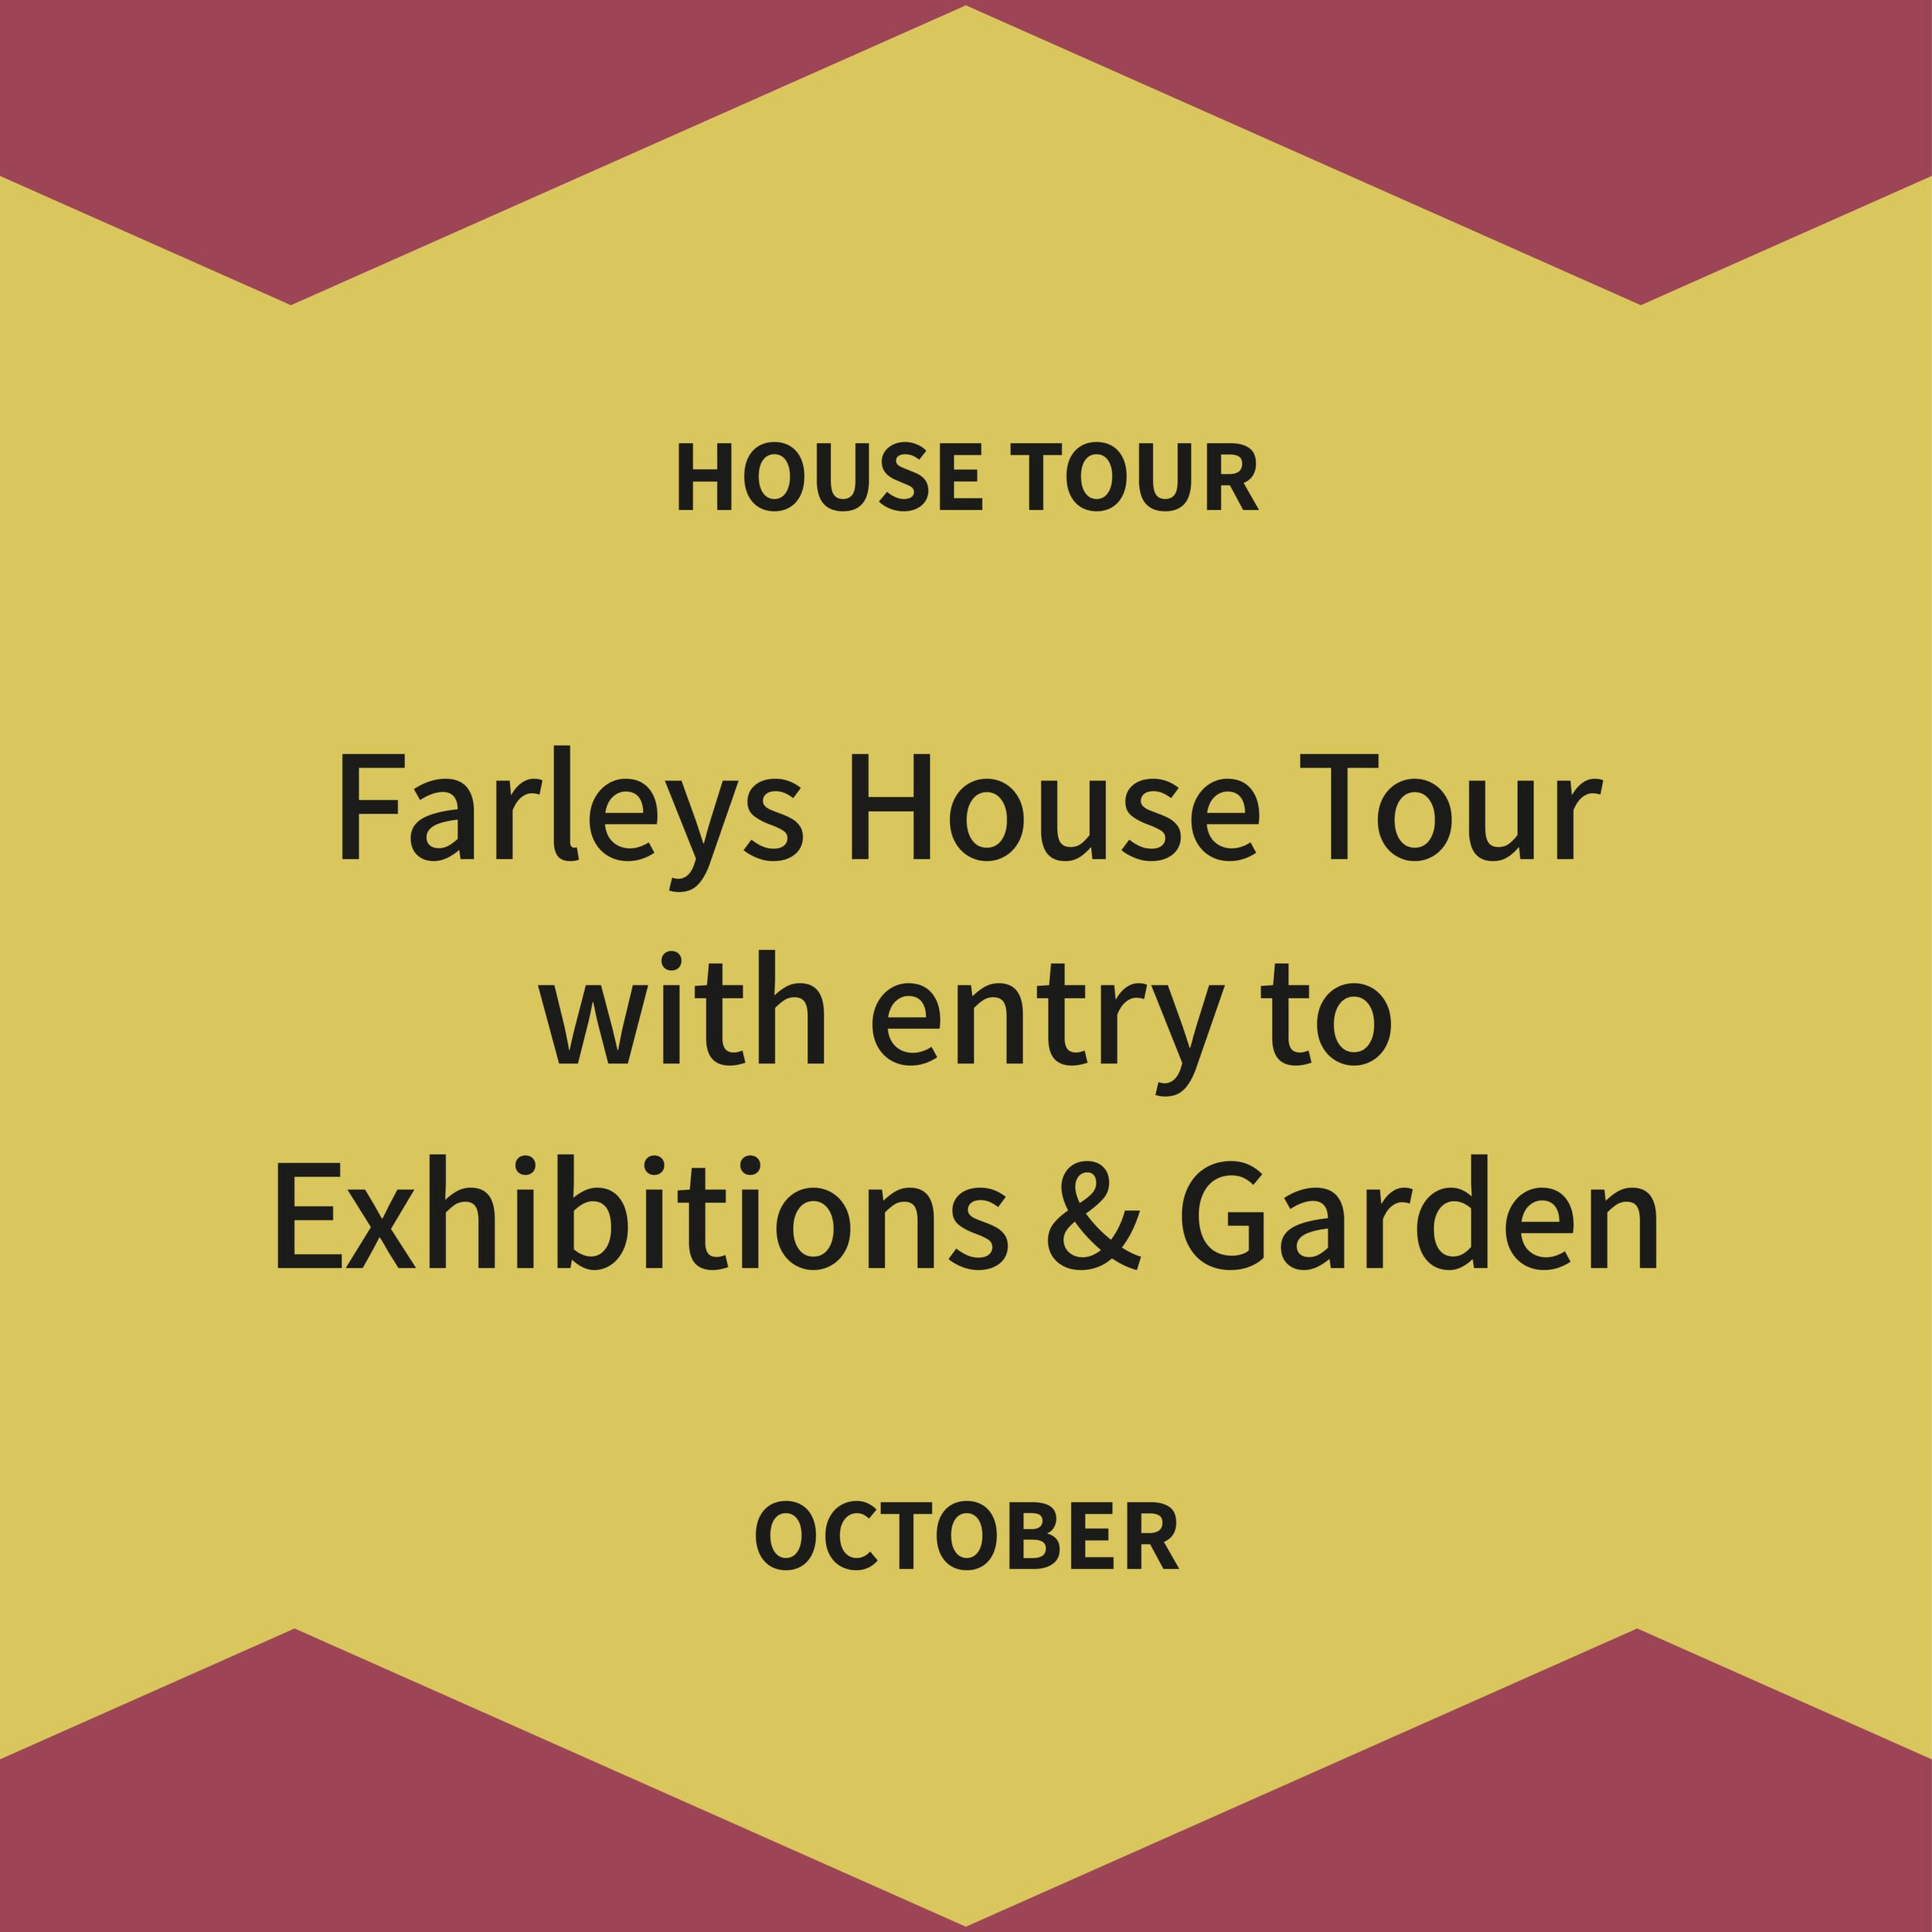 House tour ticket October